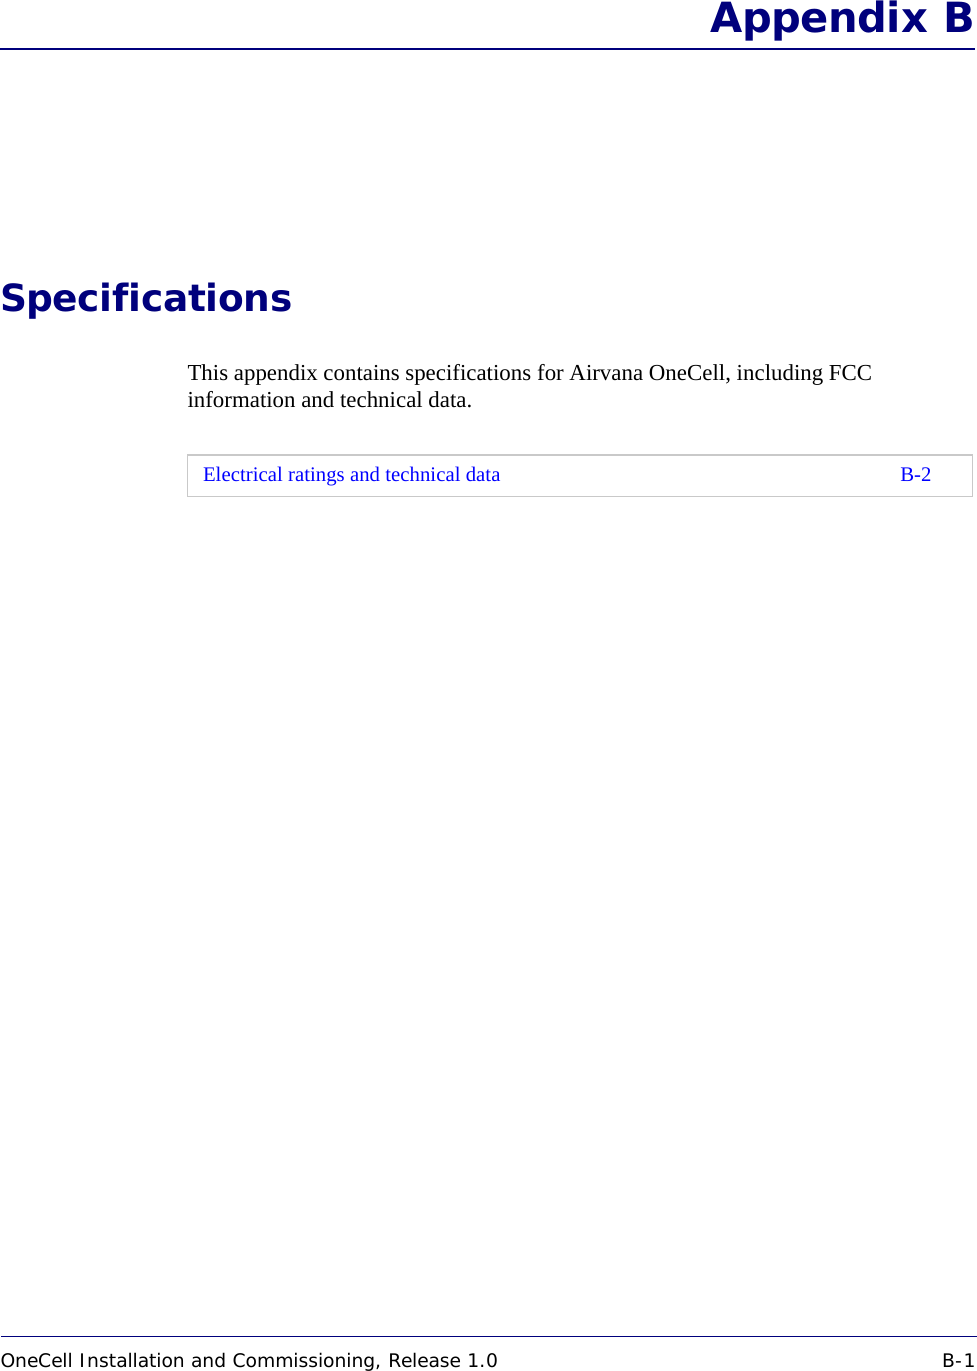 OneCell Installation and Commissioning, Release 1.0 B-1DRAFTAppendix BSpecificationsThis appendix contains specifications for Airvana OneCell, including FCC information and technical data. Electrical ratings and technical data B-2